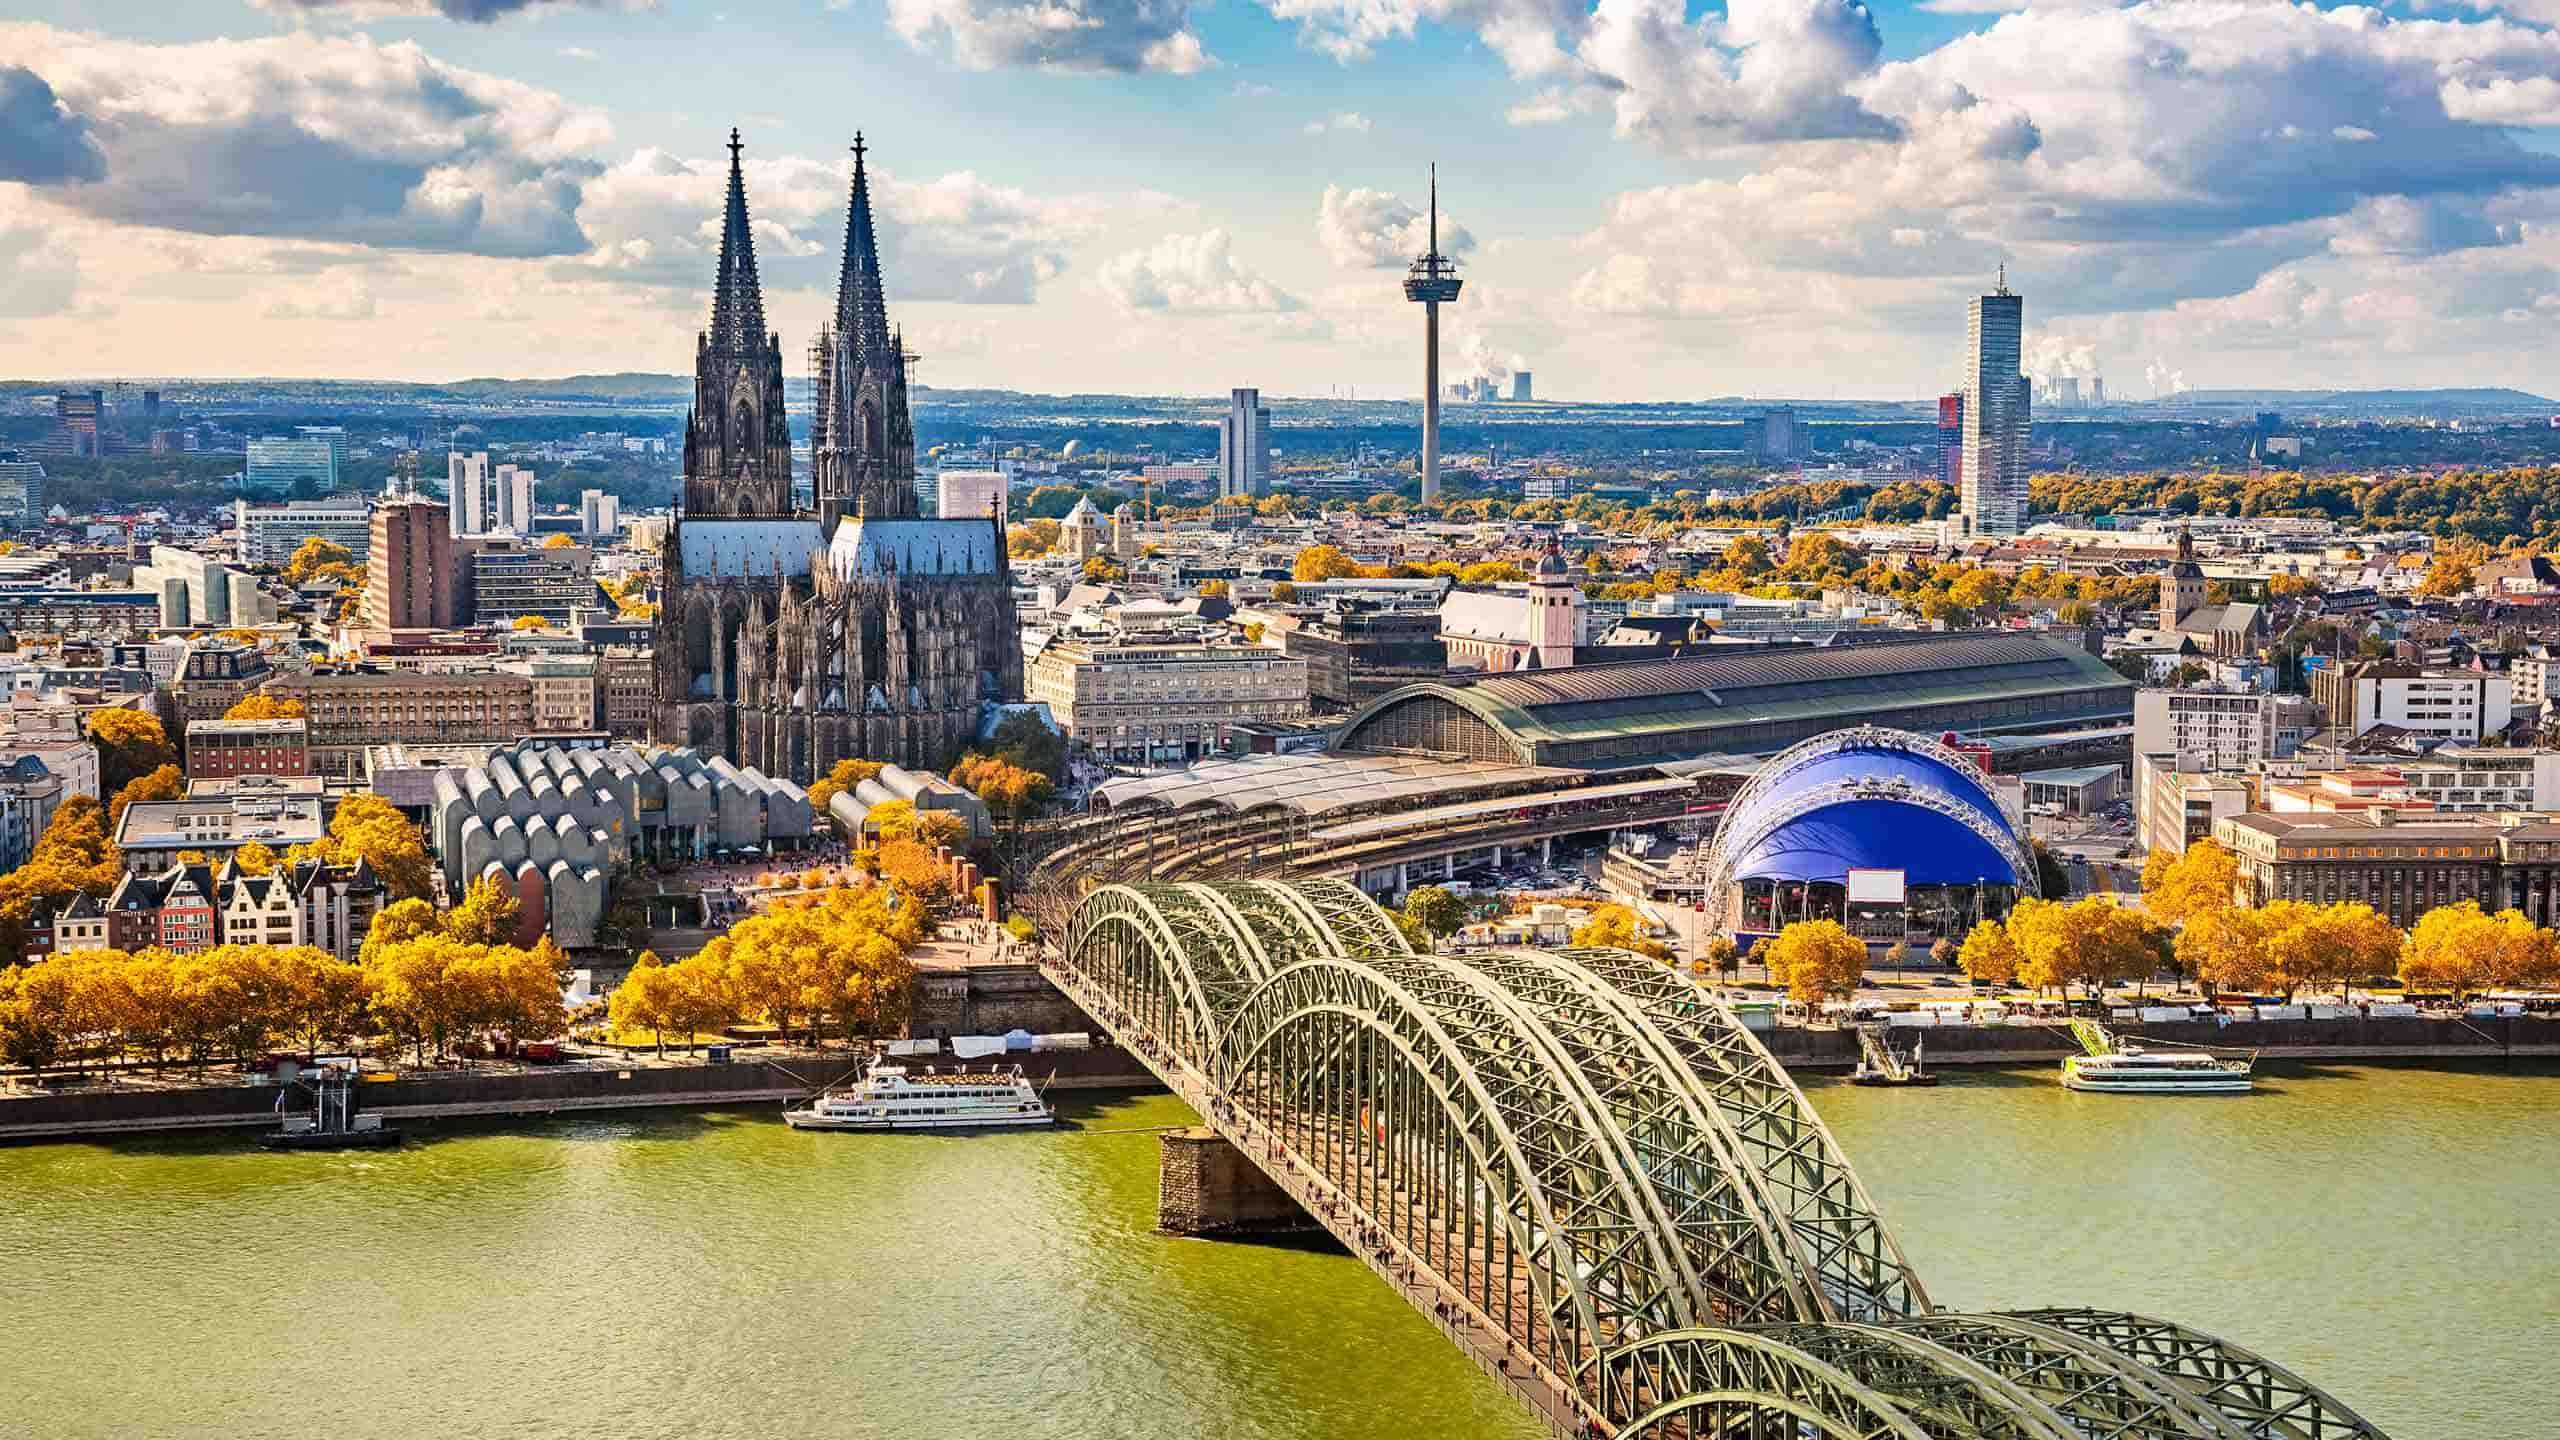 Active & Discovery Cruise The Rhine & Moselle: Canals, Vineyards & Castles (Amsterdam To Remich) 8D7N